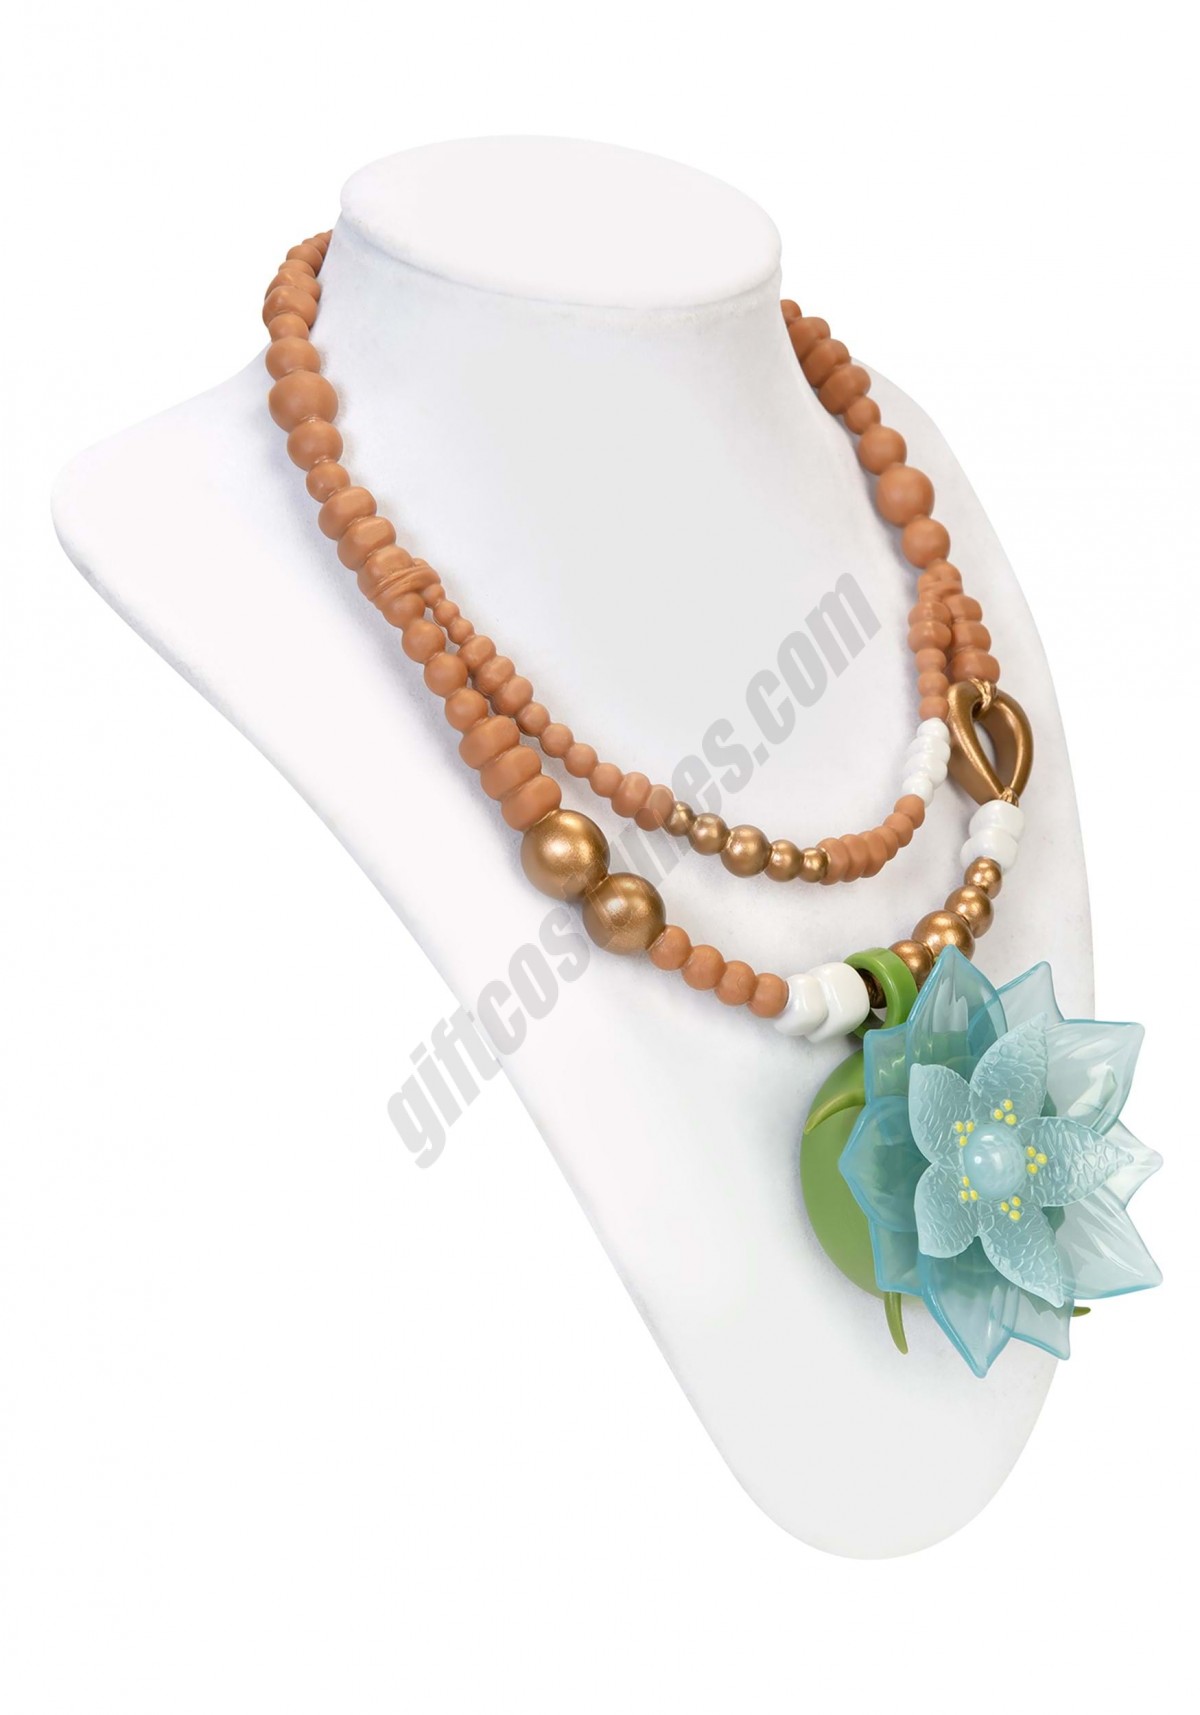 Dragon Flower Light Up Necklace from Raya and the Last Dragon Promotions - -3